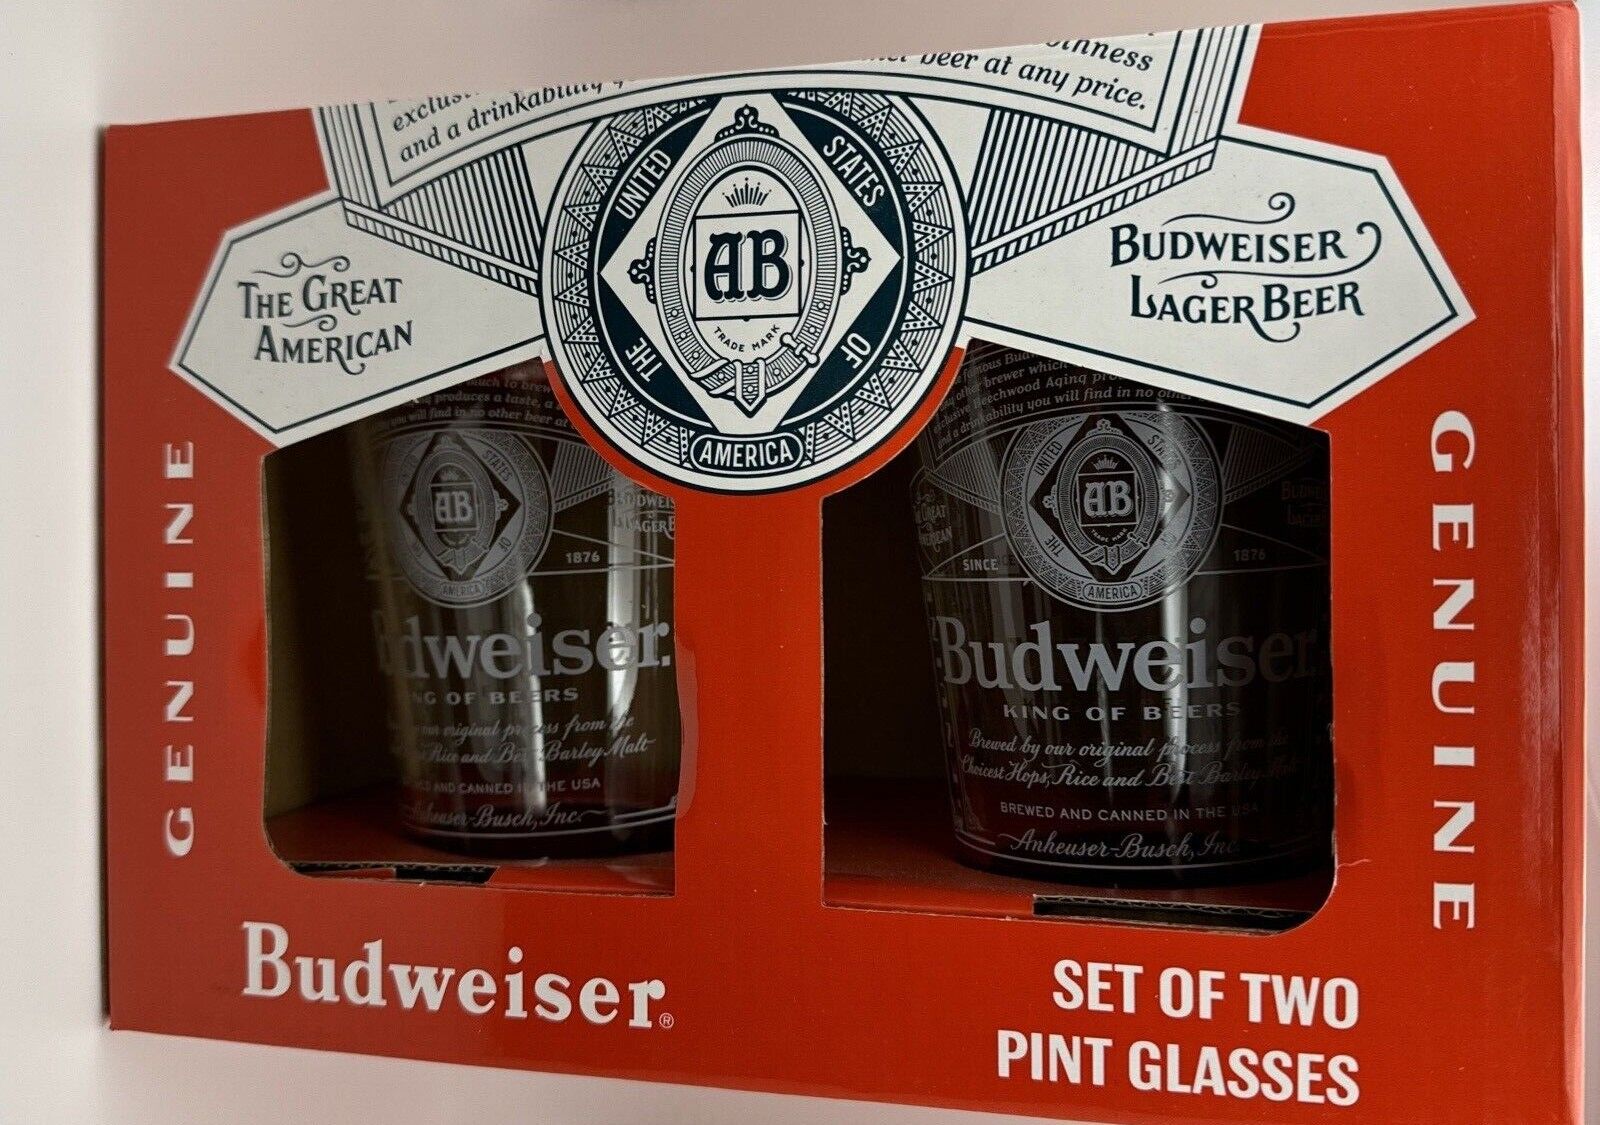 Budweiser Signature Pint Glasses 16oz Set of 2 NEW in box